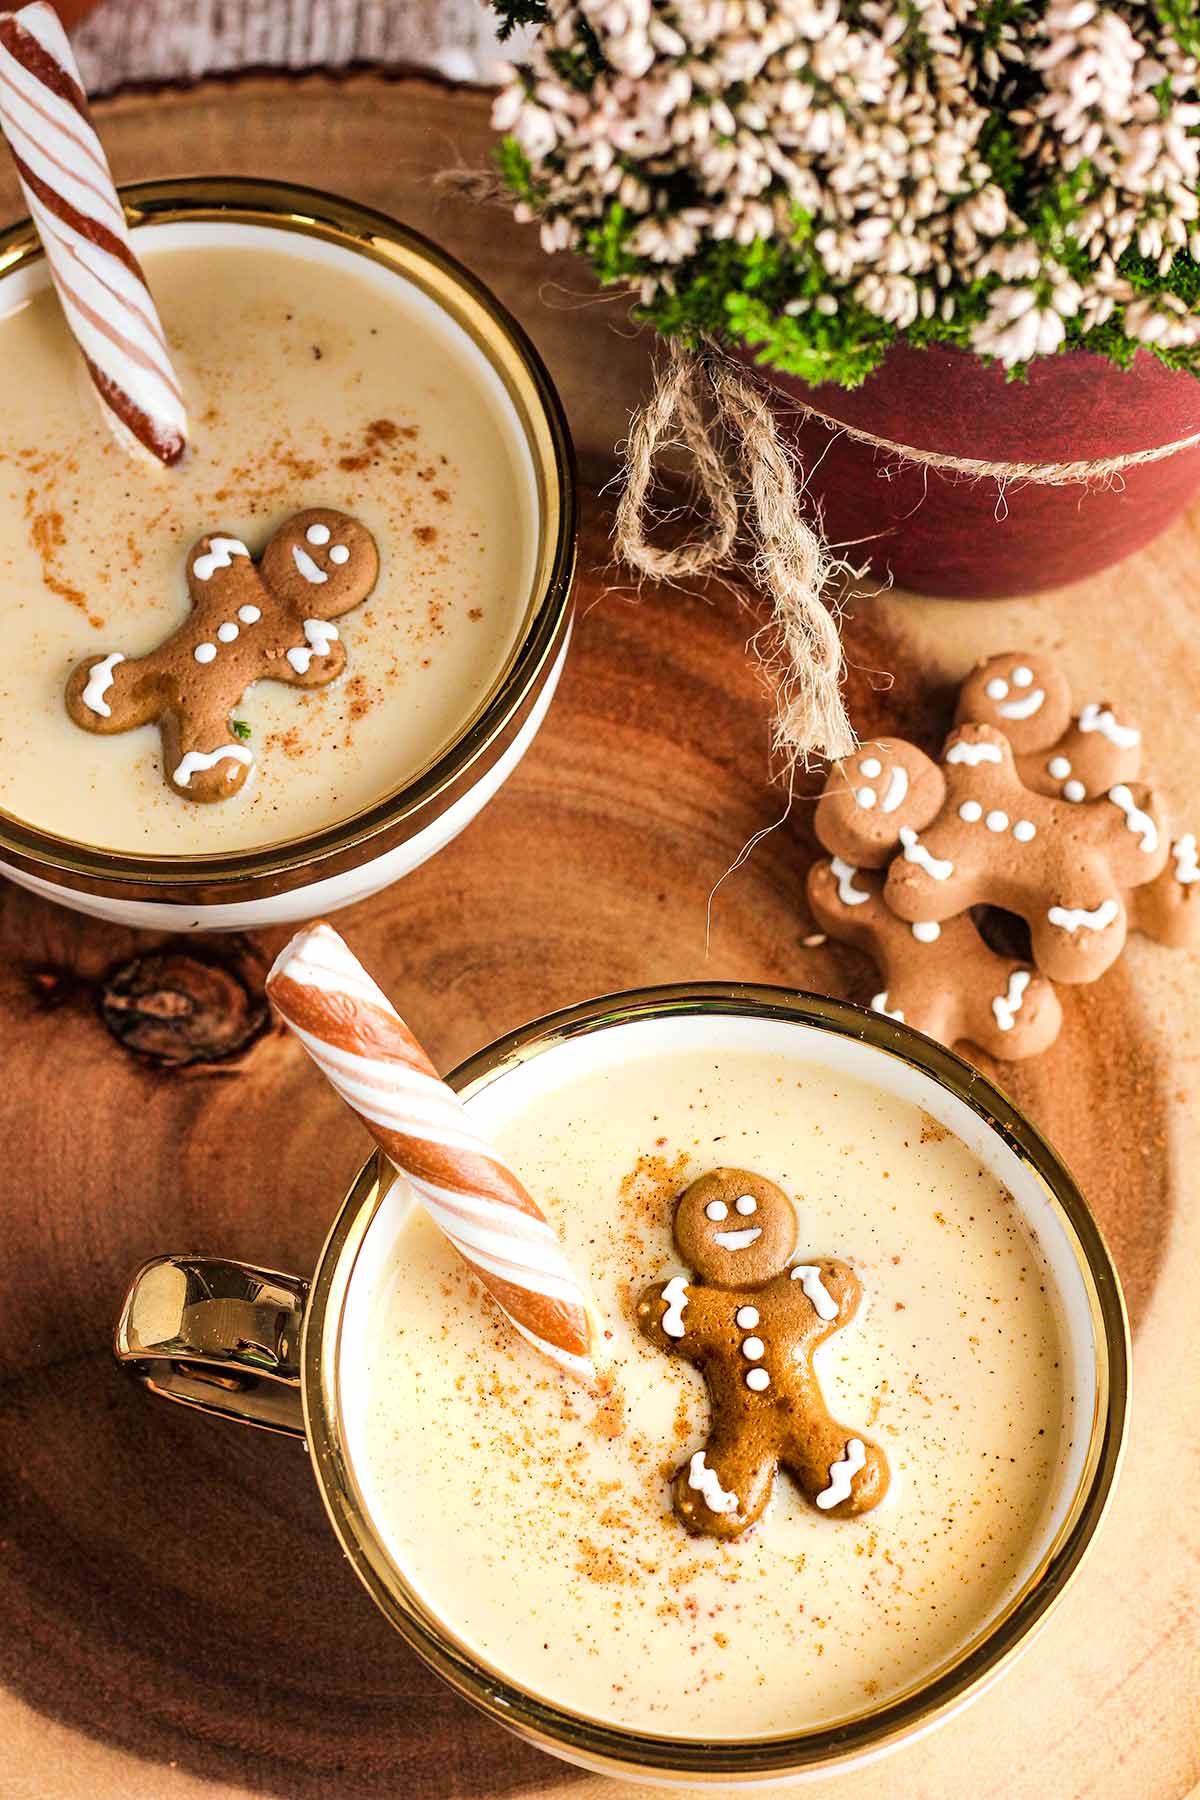 Two glasses of gingerbread and candy cane garnished Baileys Irish cream eggnog next to plant and stack of gingerbread men.